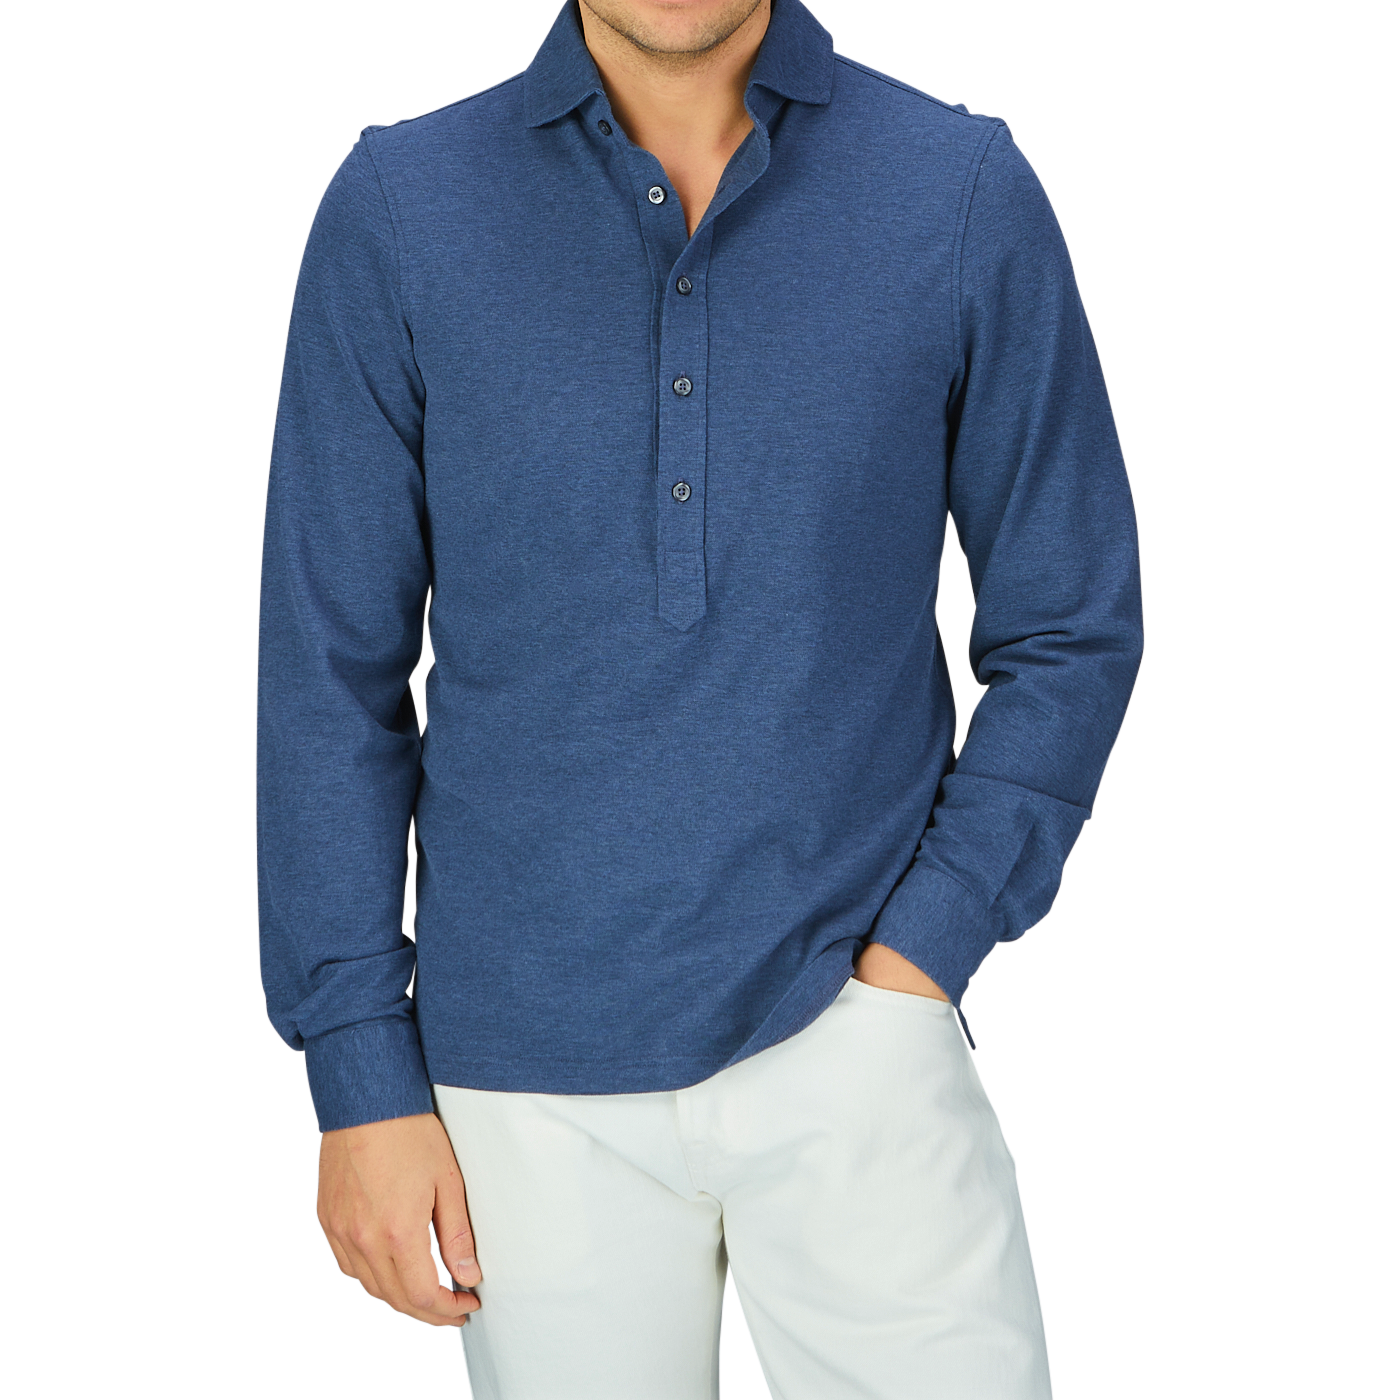 Man wearing a Gran Sasso blue cotton jersey popover shirt and white pants.